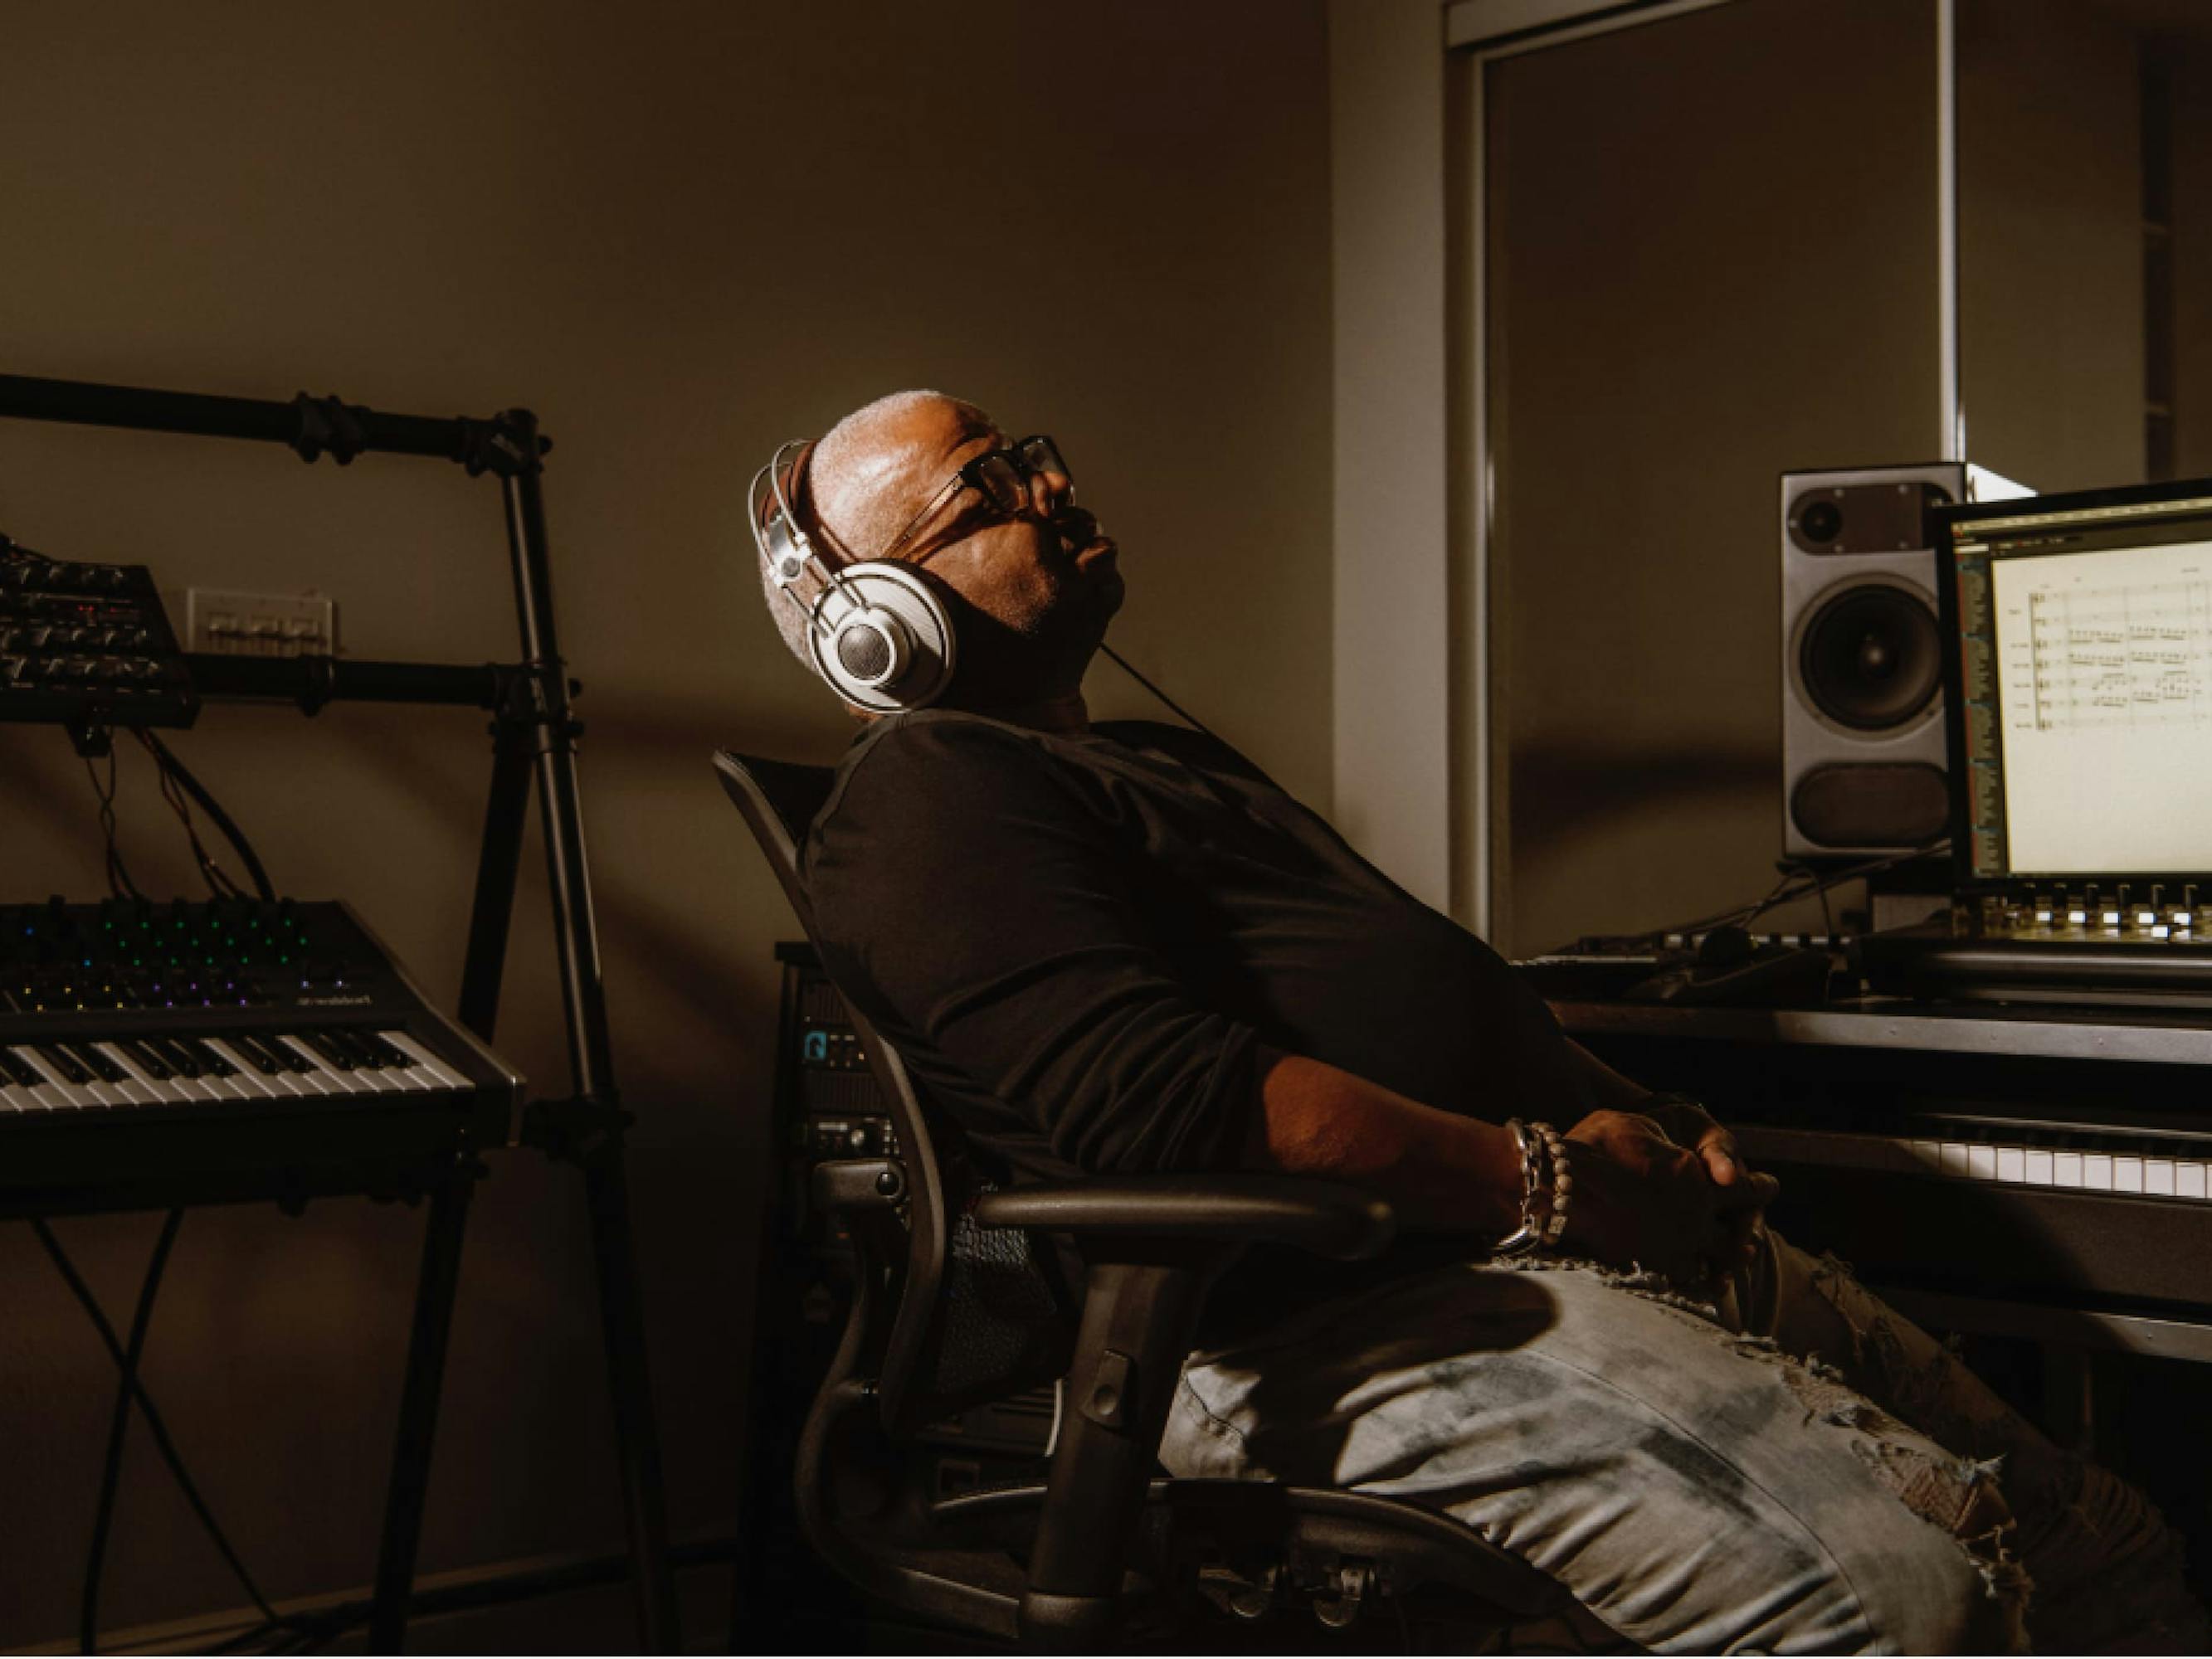 A photograph of Terence Blanchard in the studio. He is seated at a desk with a computer and speakers on it. He leans back in his chair, eyes closed, a pair of headphones over his ears. He wears a black shirt and ripped blue jeans. Behind him, we can see a keyboard. 